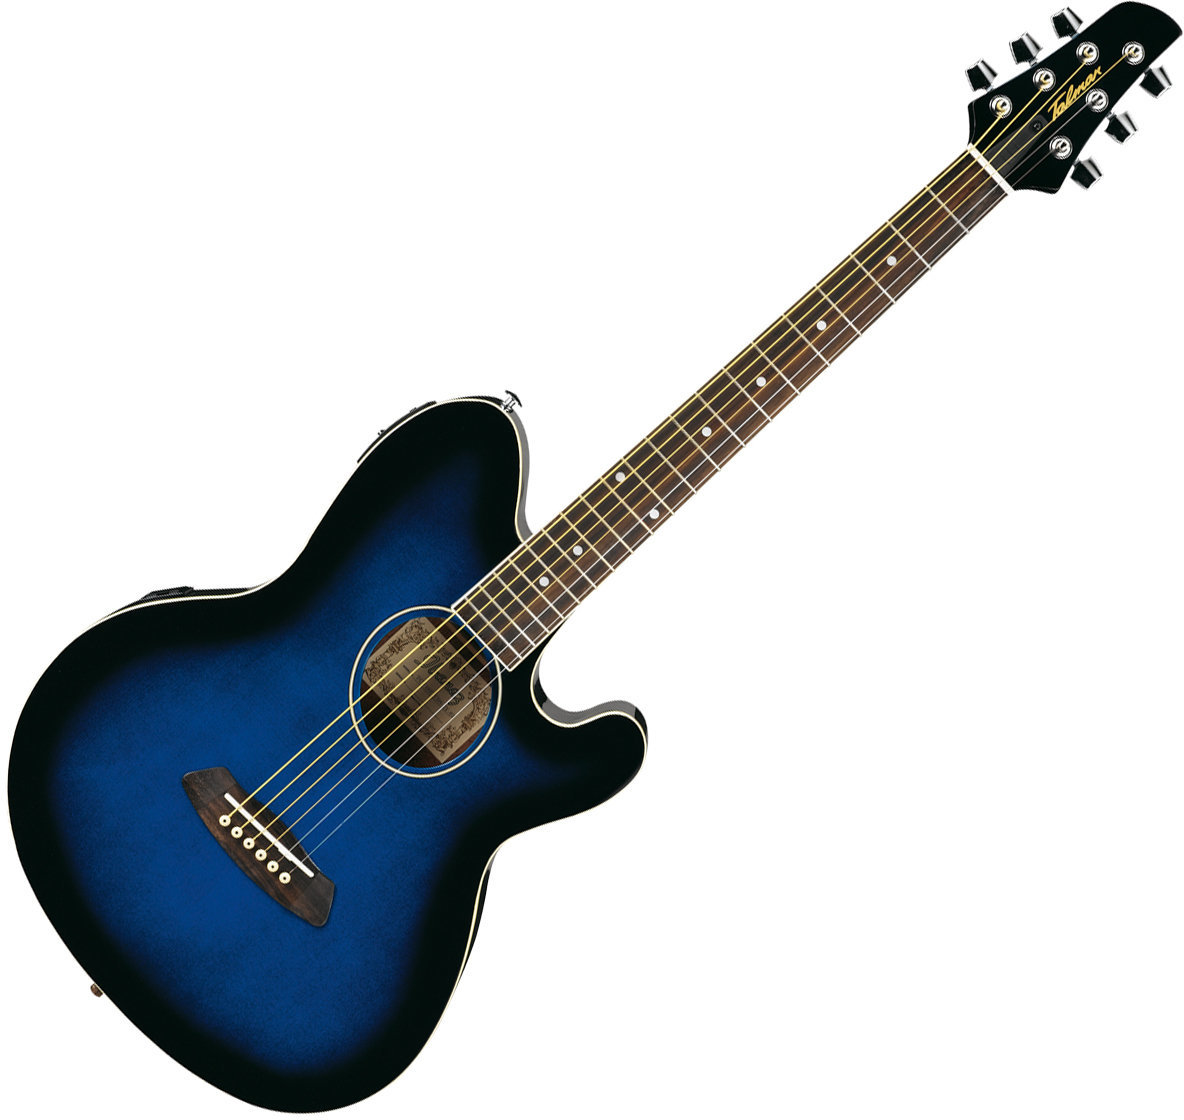 Electro-acoustic guitar Ibanez TCY 10E TBS